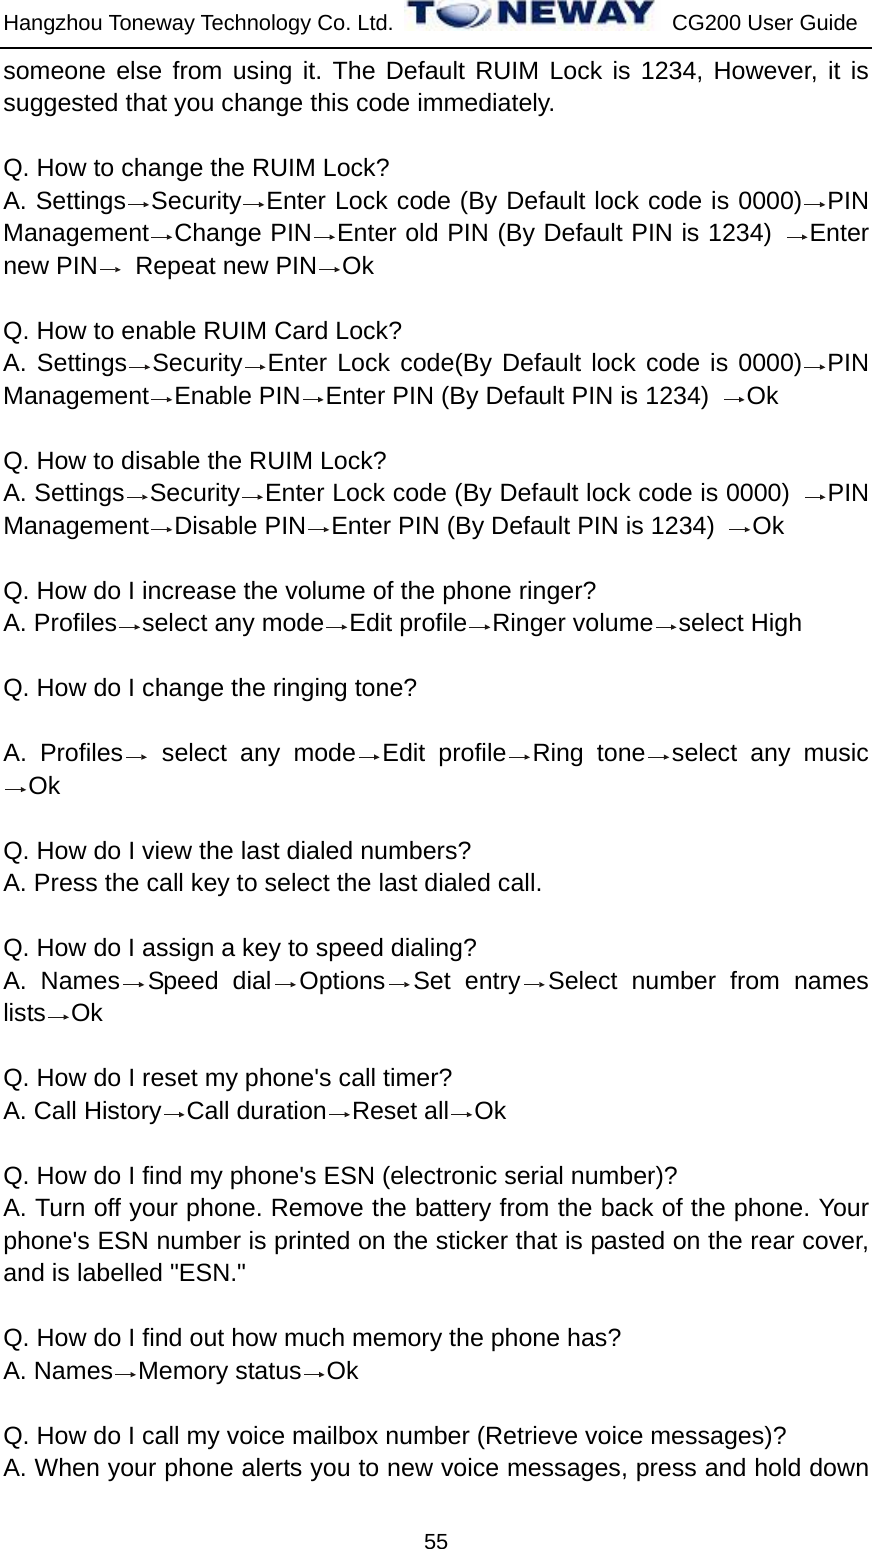 Hangzhou Toneway Technology Co. Ltd.    CG200 User Guide 55 someone else from using it. The Default RUIM Lock is 1234, However, it is suggested that you change this code immediately.  Q. How to change the RUIM Lock? A. Settings Security Enter Lock code (By Default lock code is 0000) PIN Management Change PIN Enter old PIN (By Default PIN is 1234)  Enter new PIN  Repeat new PIN Ok   Q. How to enable RUIM Card Lock? A. Settings Security Enter Lock code(By Default lock code is 0000) PIN Management Enable PIN Enter PIN (By Default PIN is 1234)  Ok  Q. How to disable the RUIM Lock? A. Settings Security Enter Lock code (By Default lock code is 0000)  PIN Management Disable PIN Enter PIN (By Default PIN is 1234)  Ok  Q. How do I increase the volume of the phone ringer? A. Profiles select any mode Edit profile Ringer volume select High    Q. How do I change the ringing tone?  A. Profiles  select any mode Edit profile Ring tone select any music Ok  Q. How do I view the last dialed numbers? A. Press the call key to select the last dialed call.  Q. How do I assign a key to speed dialing? A. Names Speed dial Options Set entry Select number from names lists Ok  Q. How do I reset my phone&apos;s call timer? A. Call History Call duration Reset all Ok  Q. How do I find my phone&apos;s ESN (electronic serial number)? A. Turn off your phone. Remove the battery from the back of the phone. Your phone&apos;s ESN number is printed on the sticker that is pasted on the rear cover, and is labelled &quot;ESN.&quot;  Q. How do I find out how much memory the phone has? A. Names Memory status Ok  Q. How do I call my voice mailbox number (Retrieve voice messages)? A. When your phone alerts you to new voice messages, press and hold down 